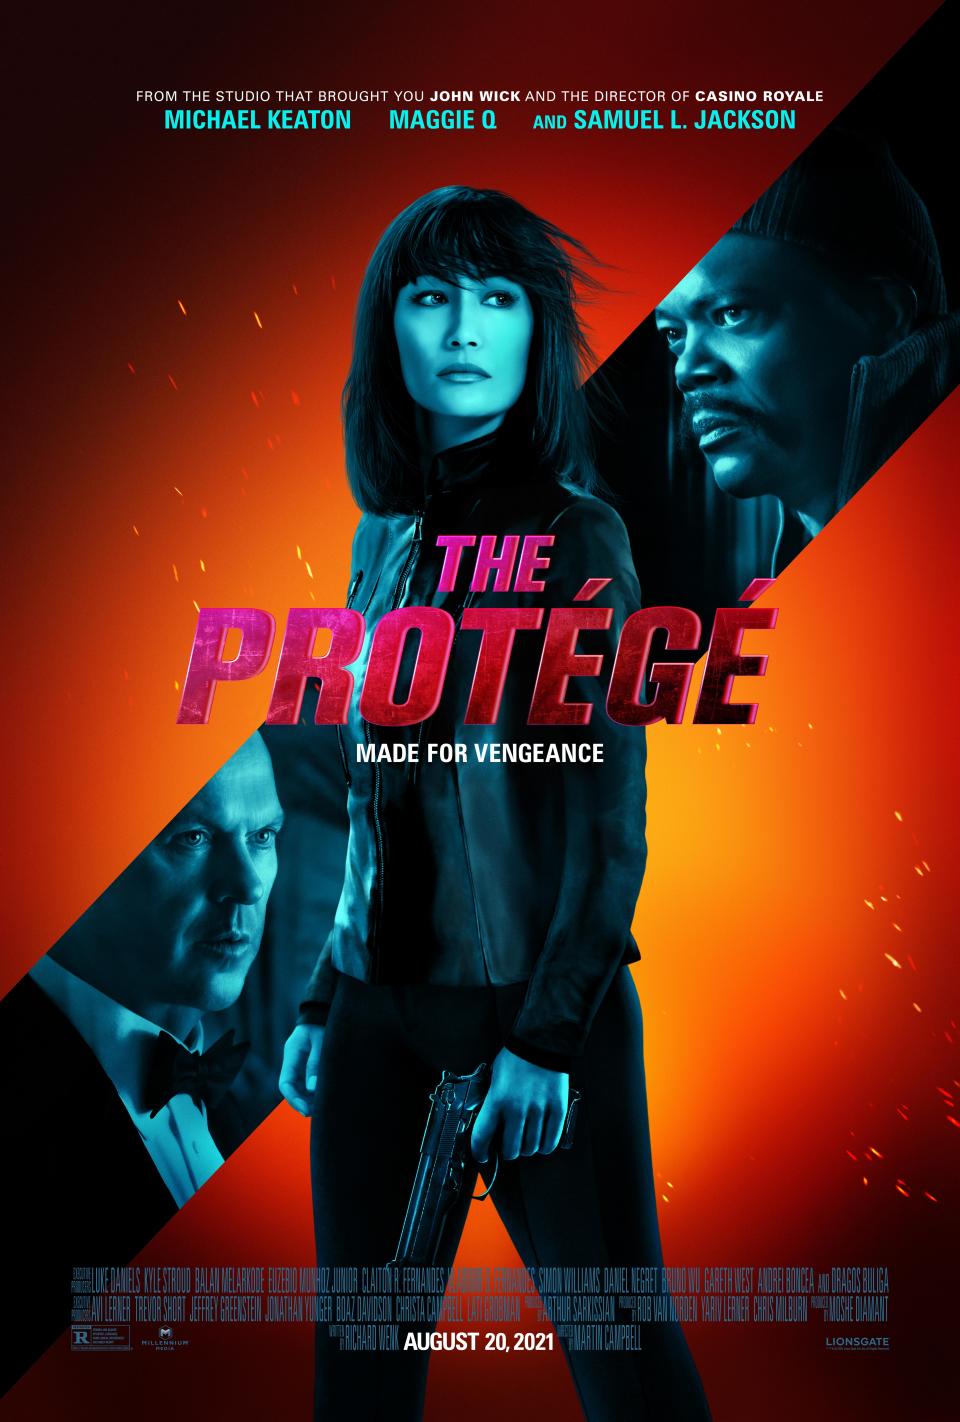 Maggie Q dominates "The Protege" and the movie poster. But not the credits.